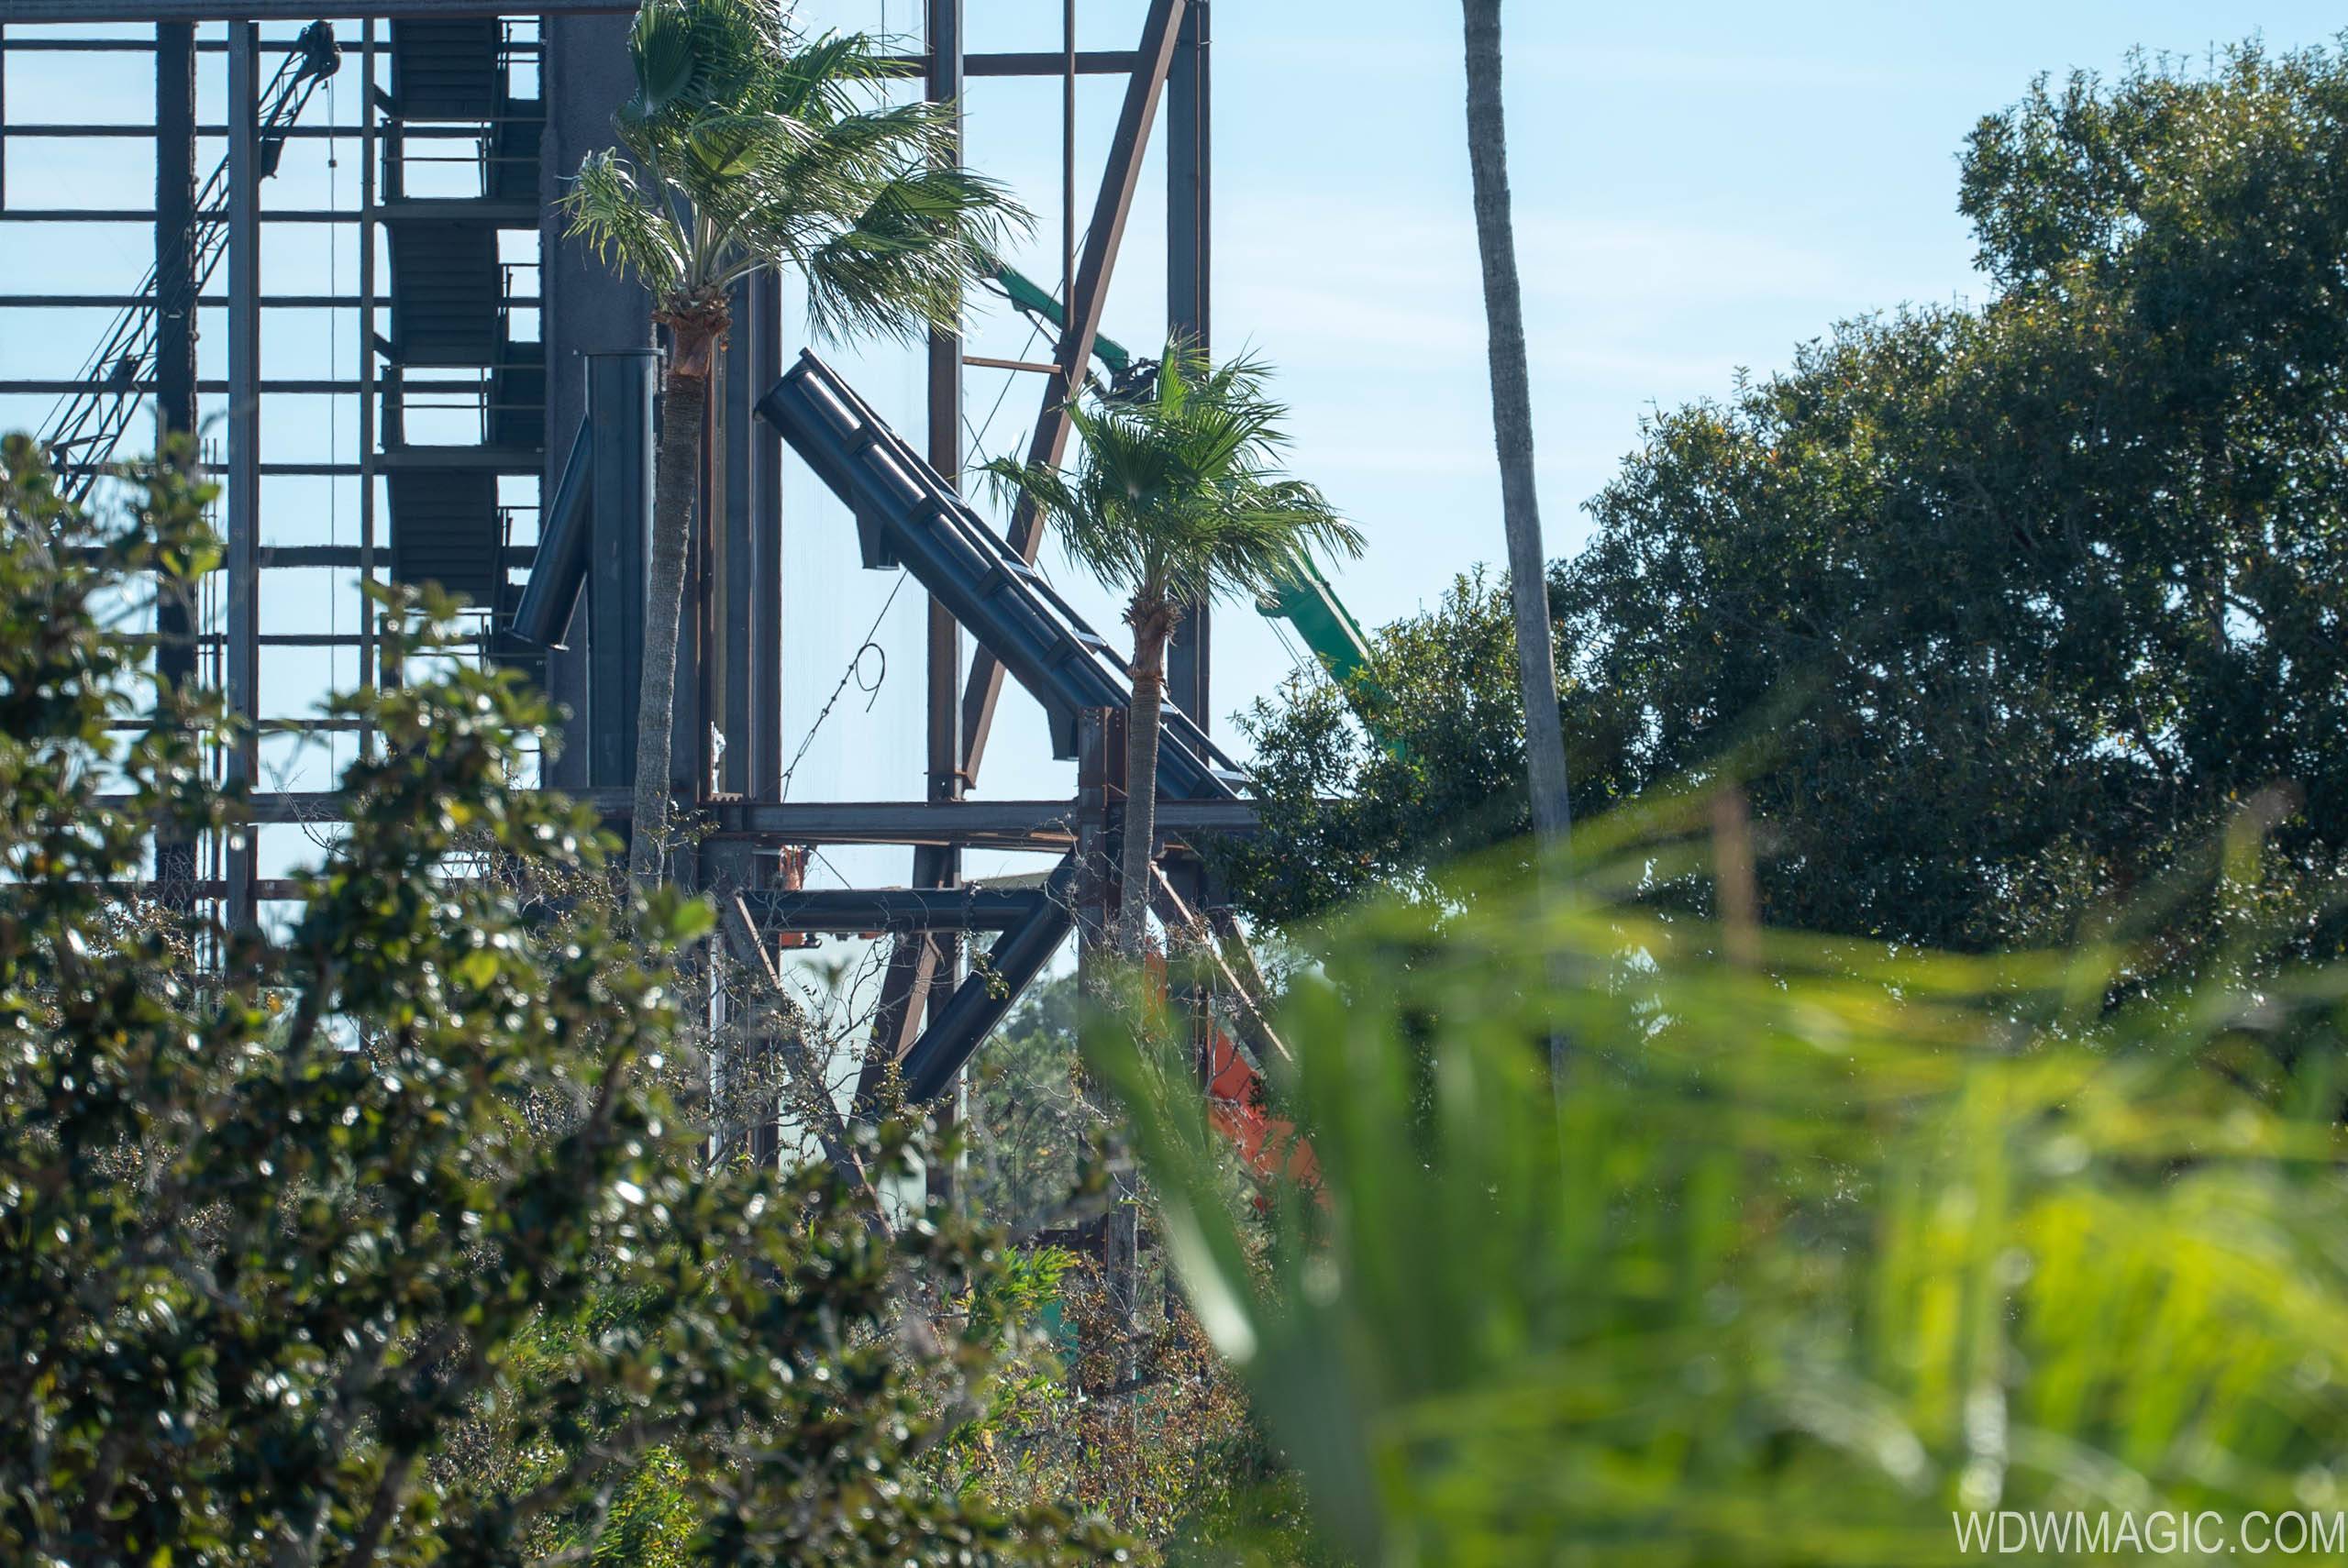 PHOTOS - First piece of track now in place at Epcot's Guardians of the Galaxy coaster